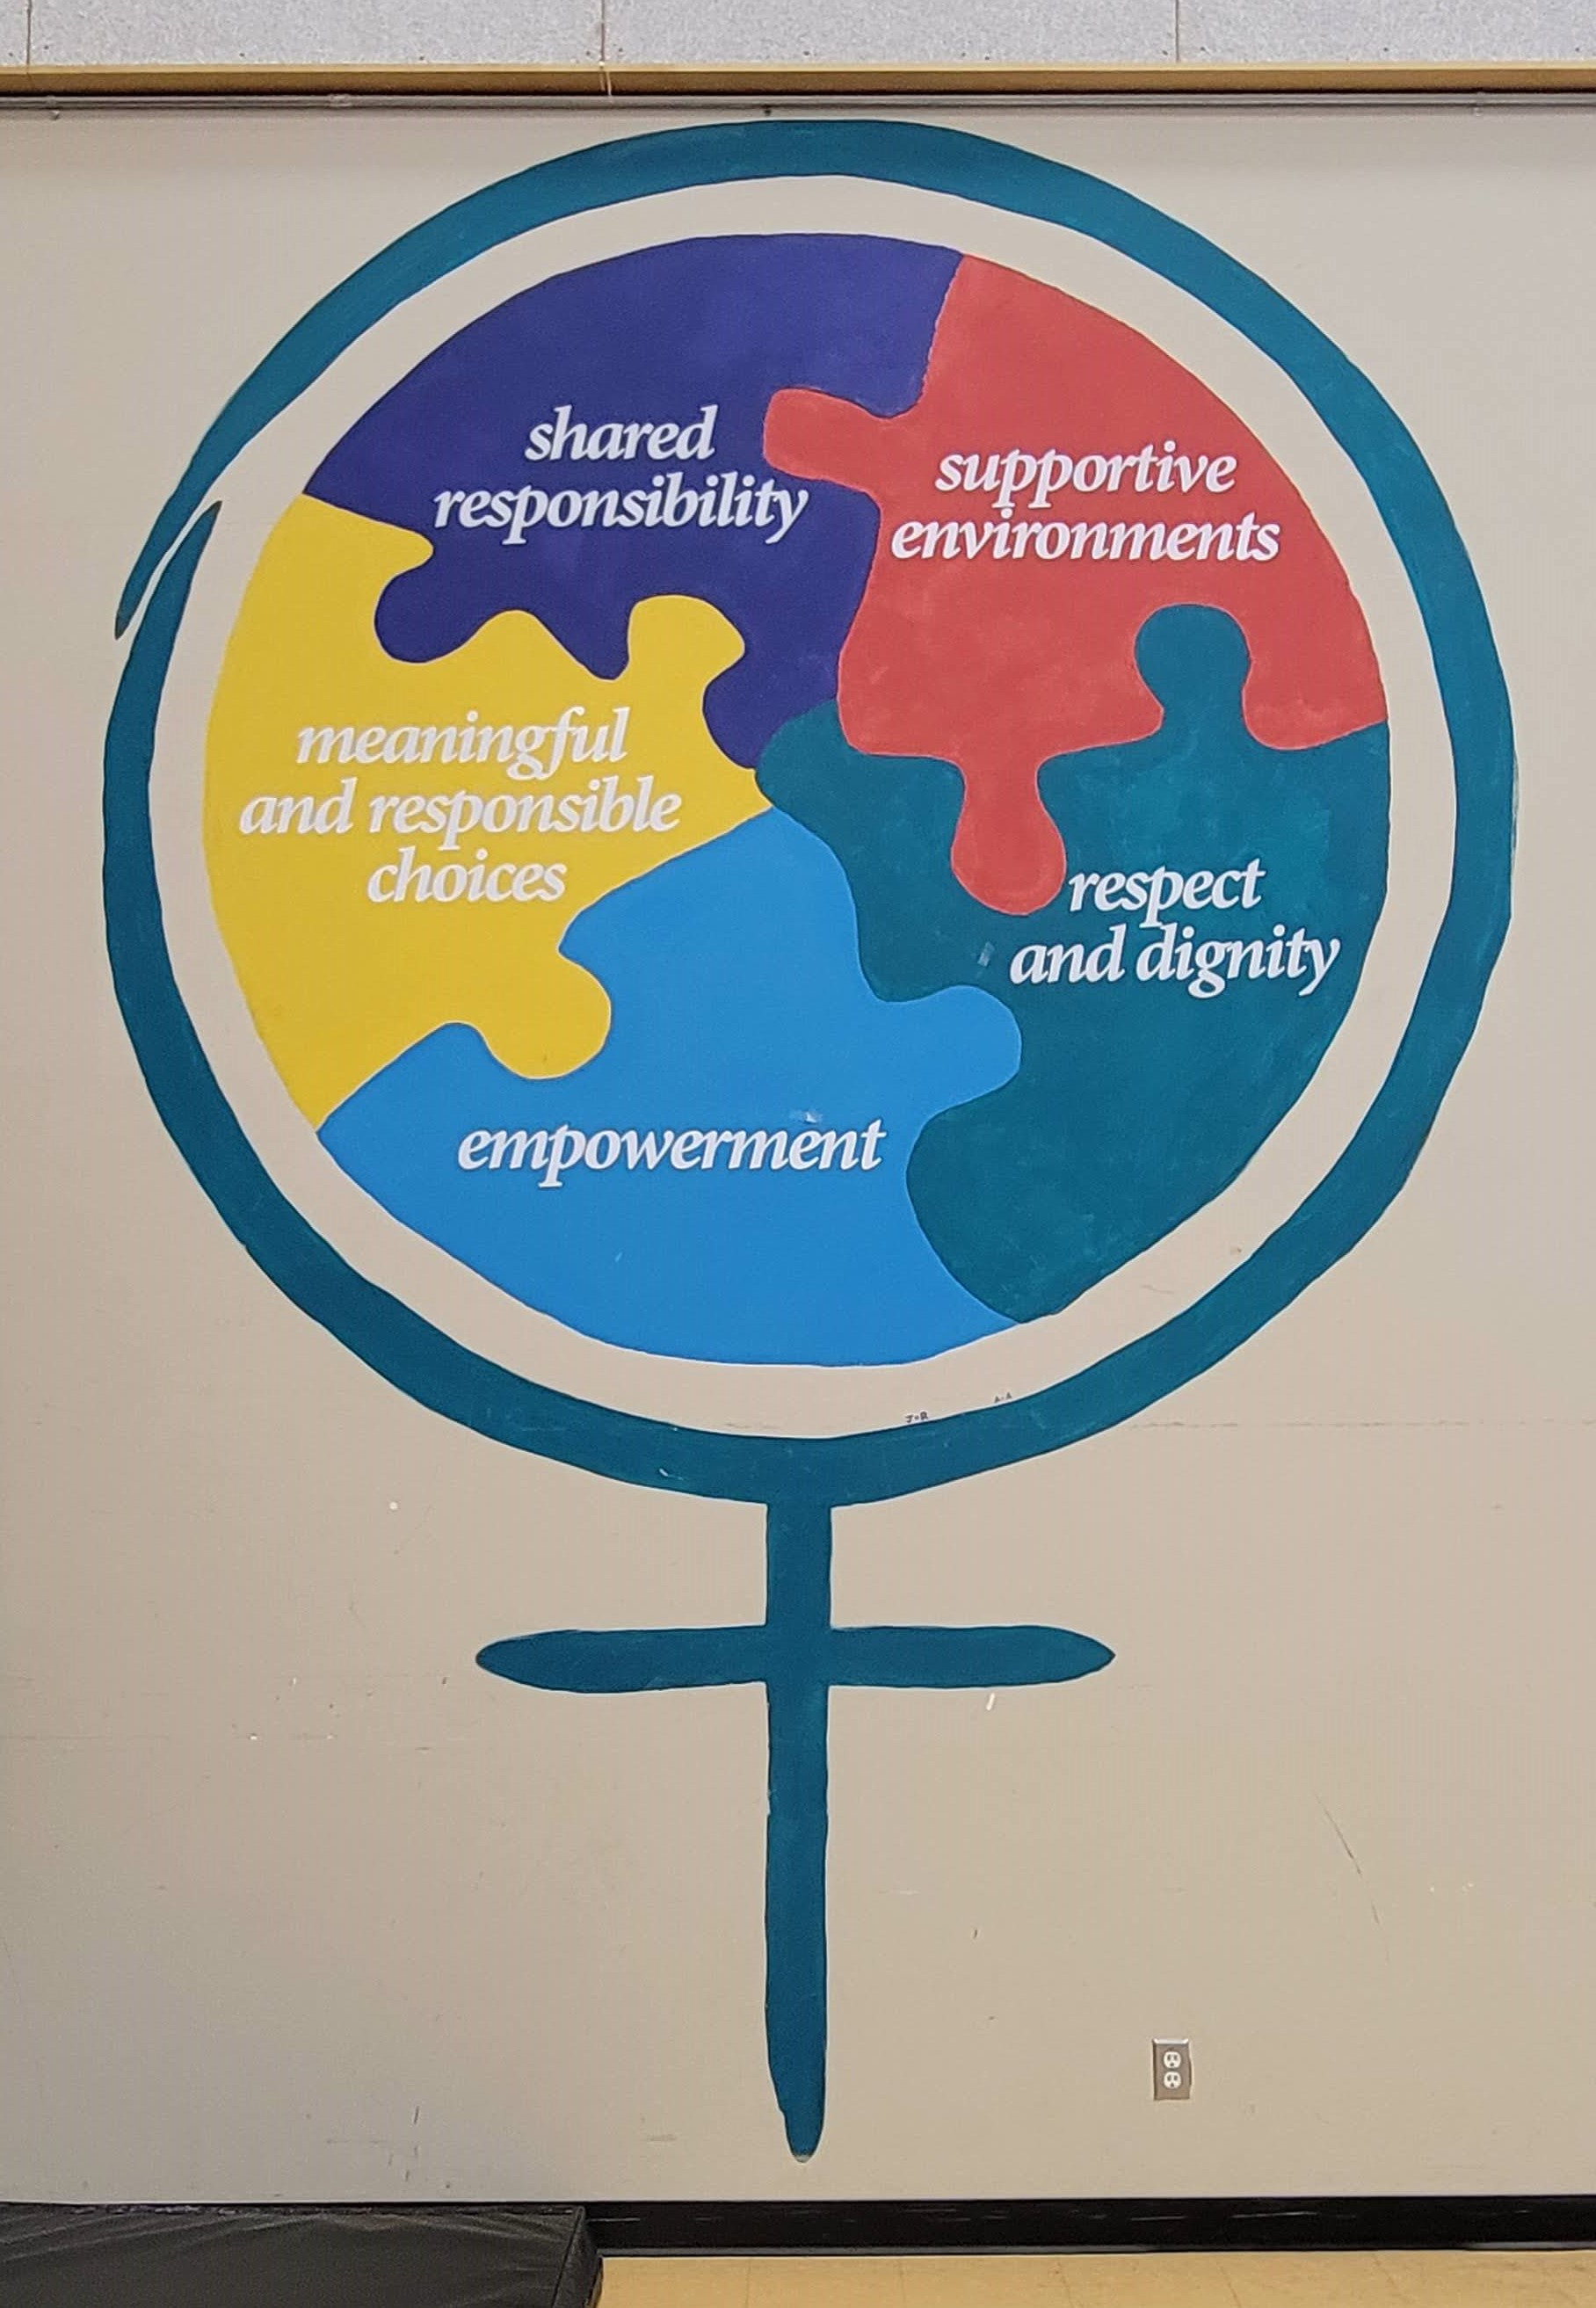 Photo of a mural at Fraser Valley Institution illustrating the “principles for change” introduced by Creating Choices.